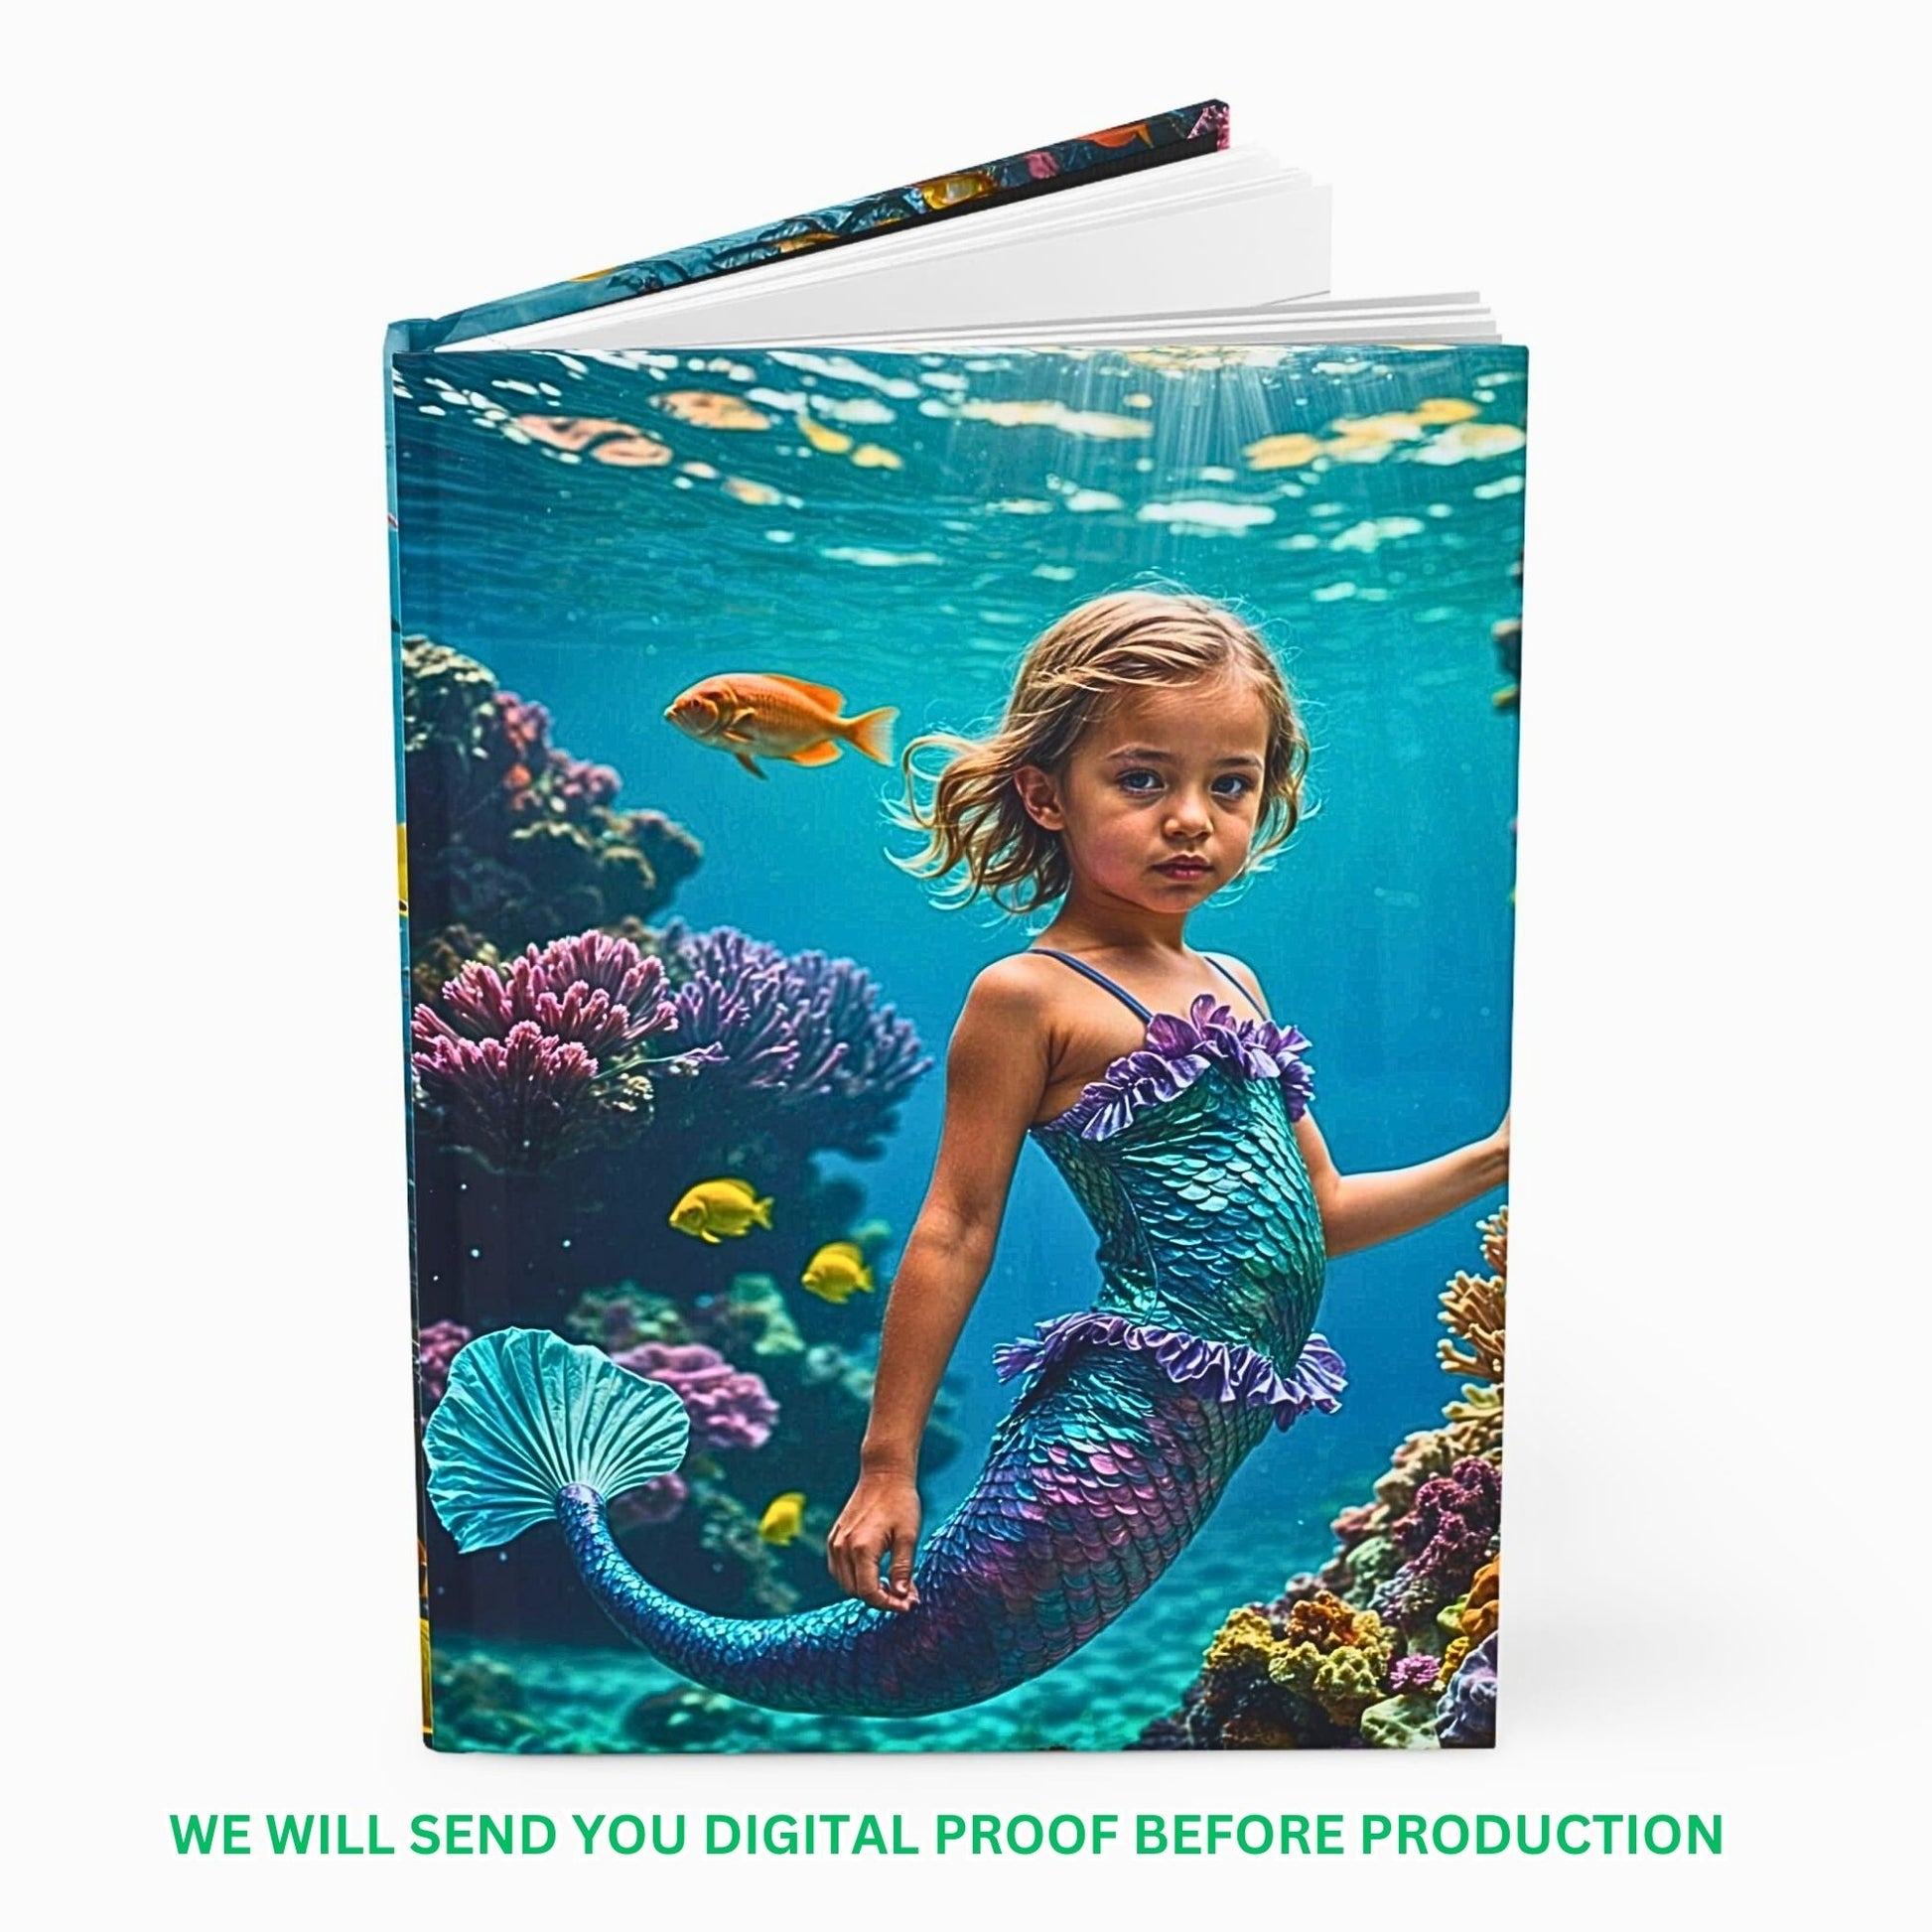 Embark on a magical journey with our Custom Mermaid Journal, tailored from her favorite photo. This personalized gift for girls is ideal for birthdays, inviting them to explore creativity and capture mermaid-inspired memories with style.